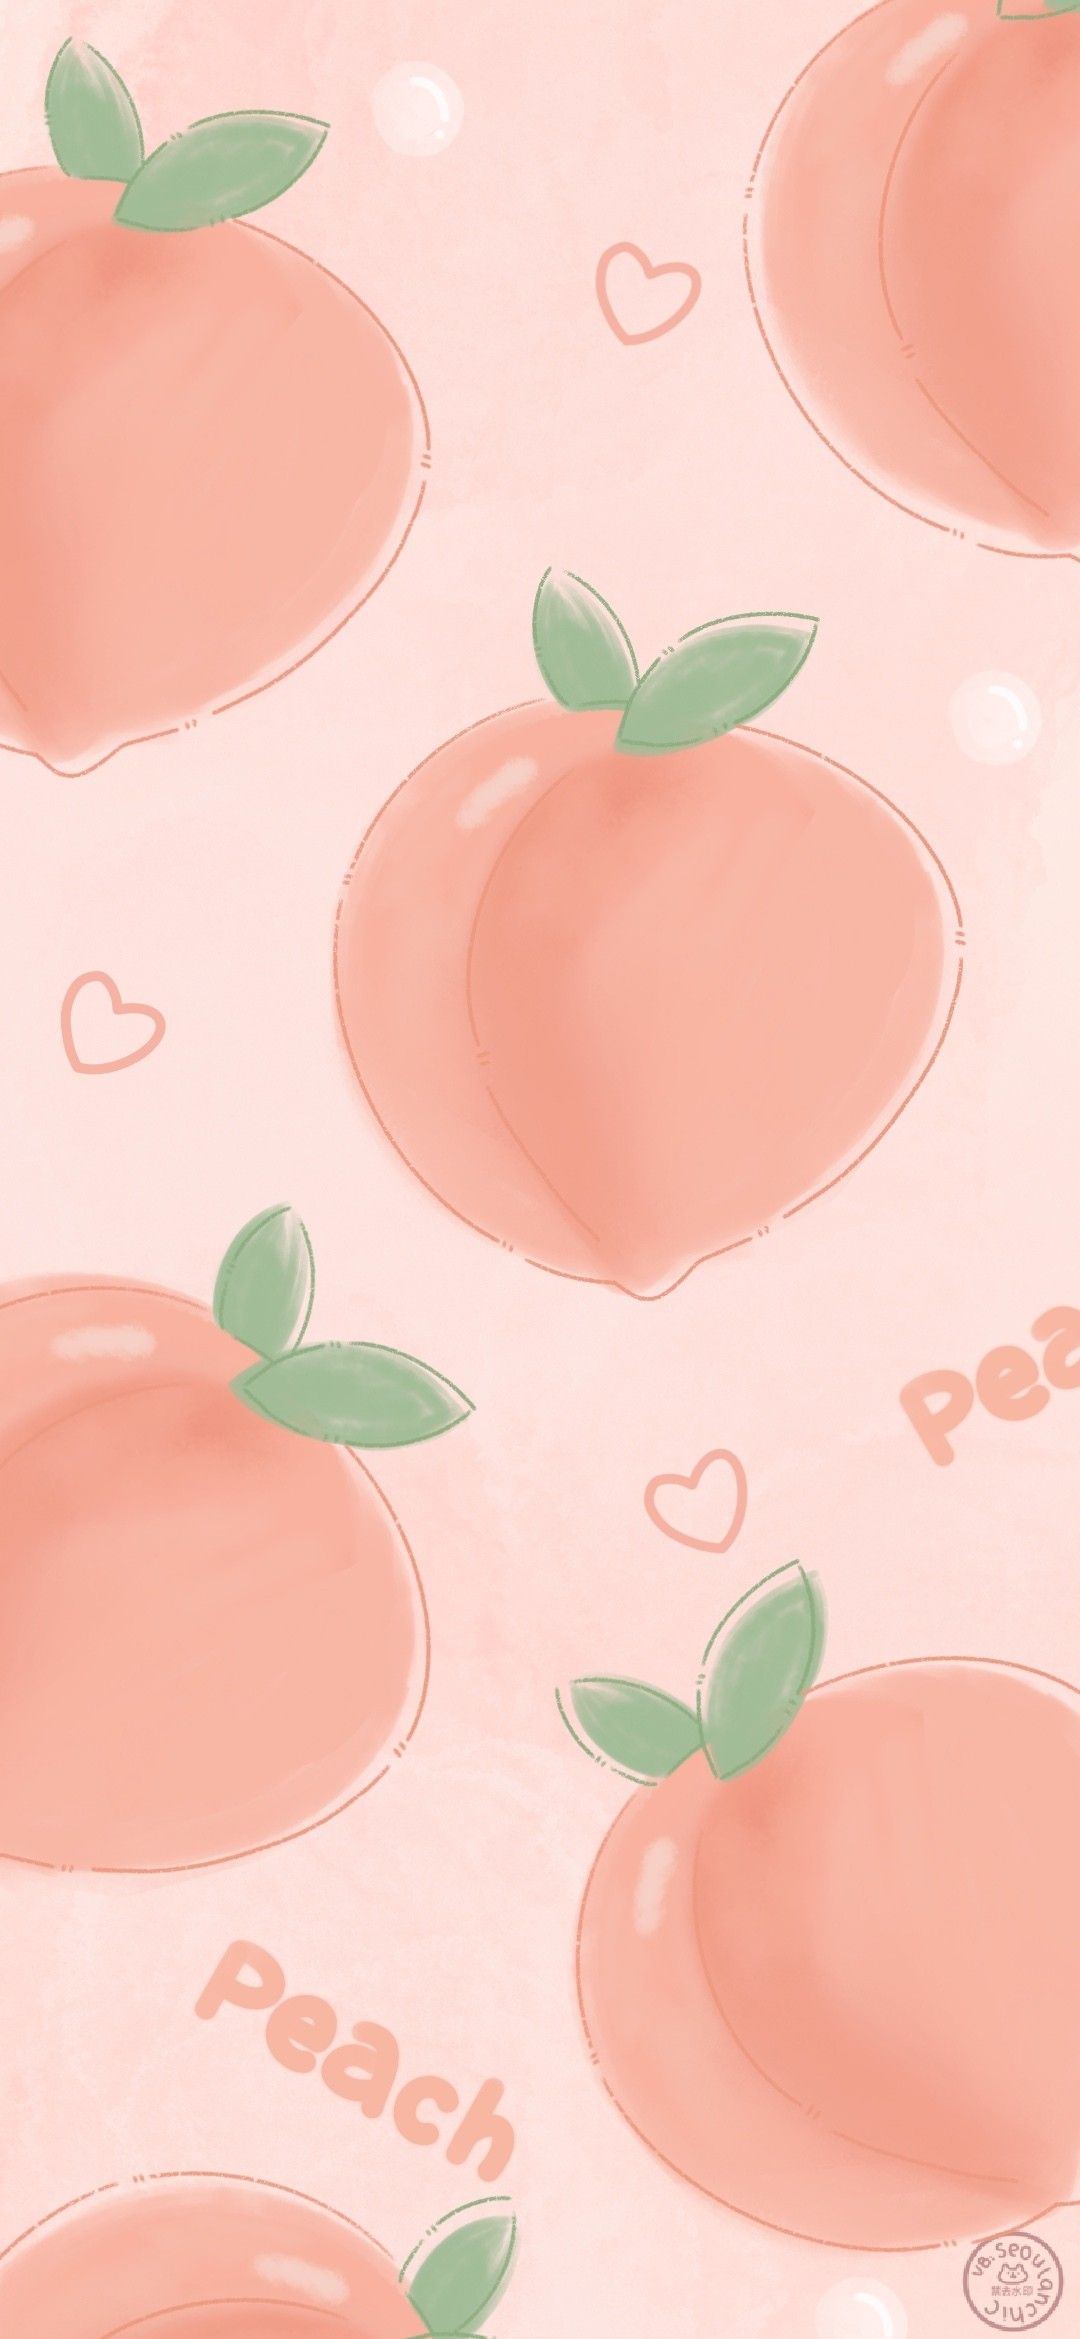 Peach background wallpaper for your phone - Cute, peach, fruit